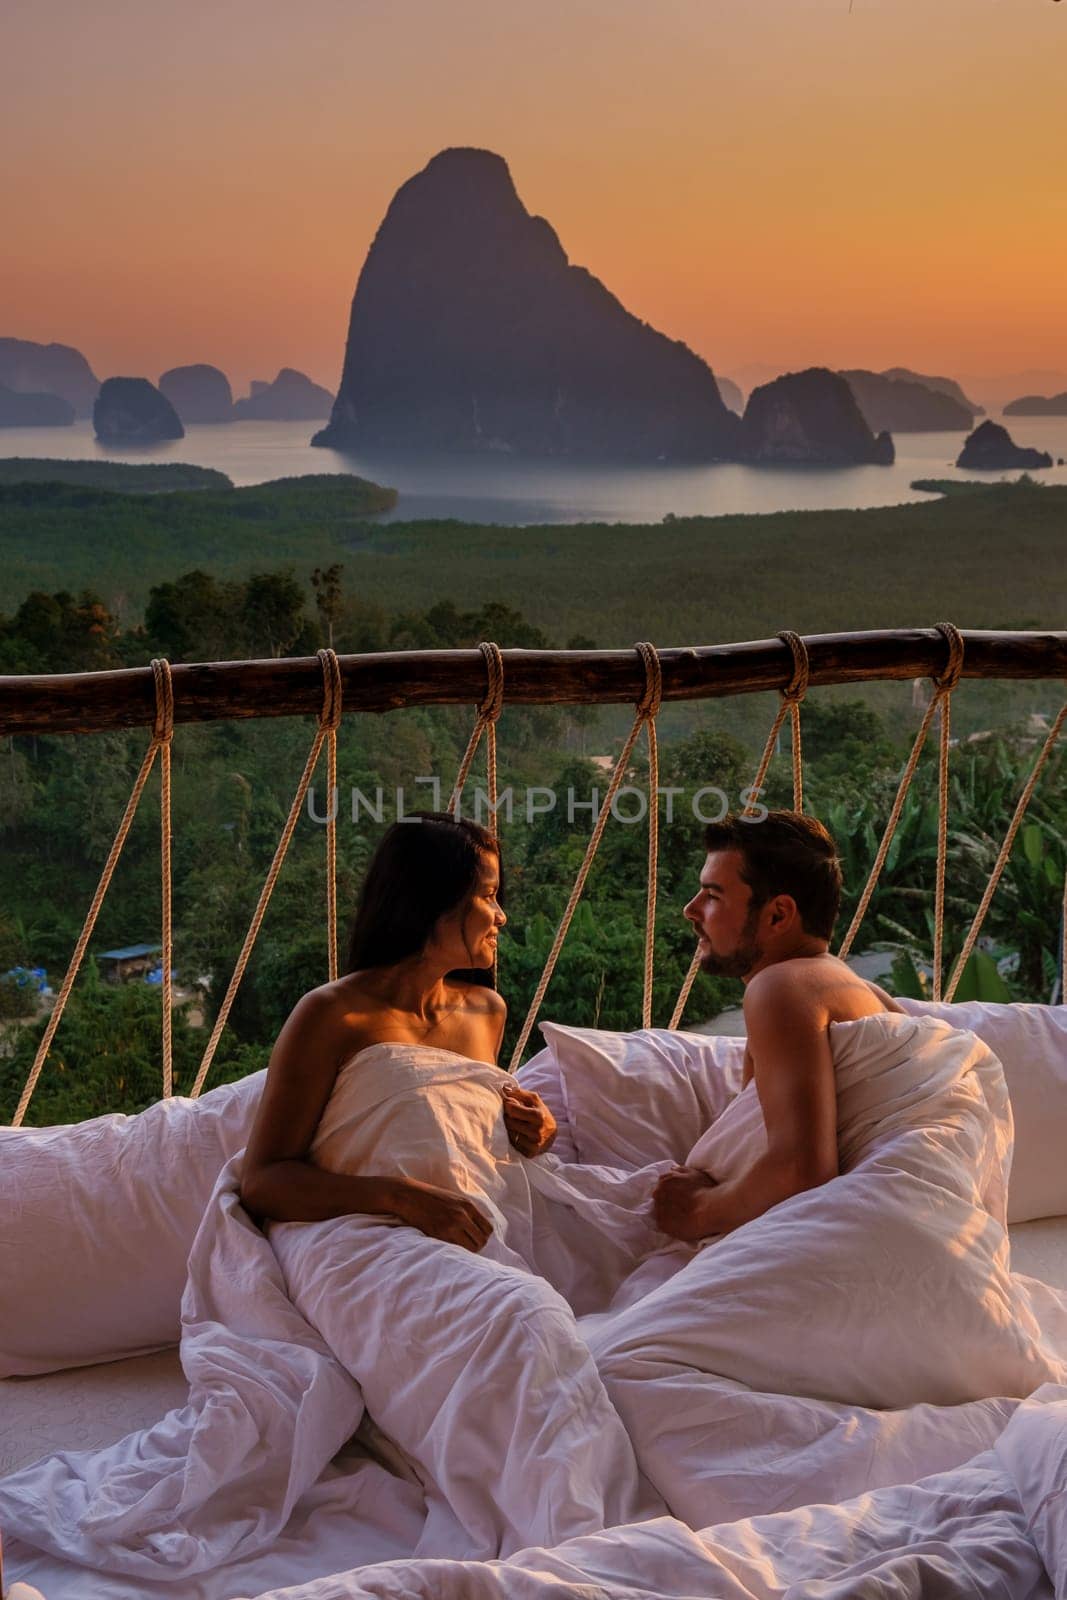 A couple in an outdoor bedroom watching the sunrise over Sametnangshe mountains in Phangnga Bay Thailand